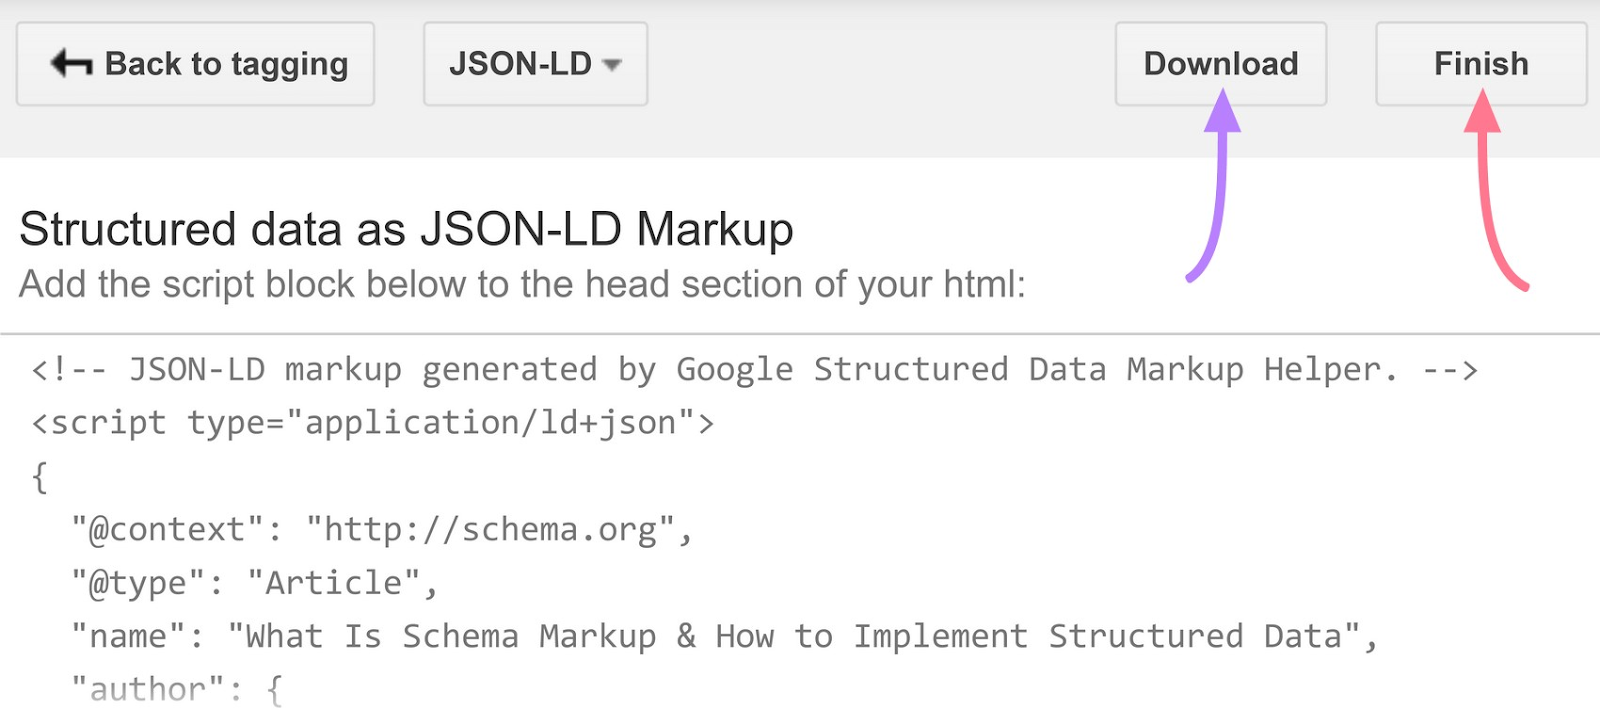 Structured data as JSON-LD Markup